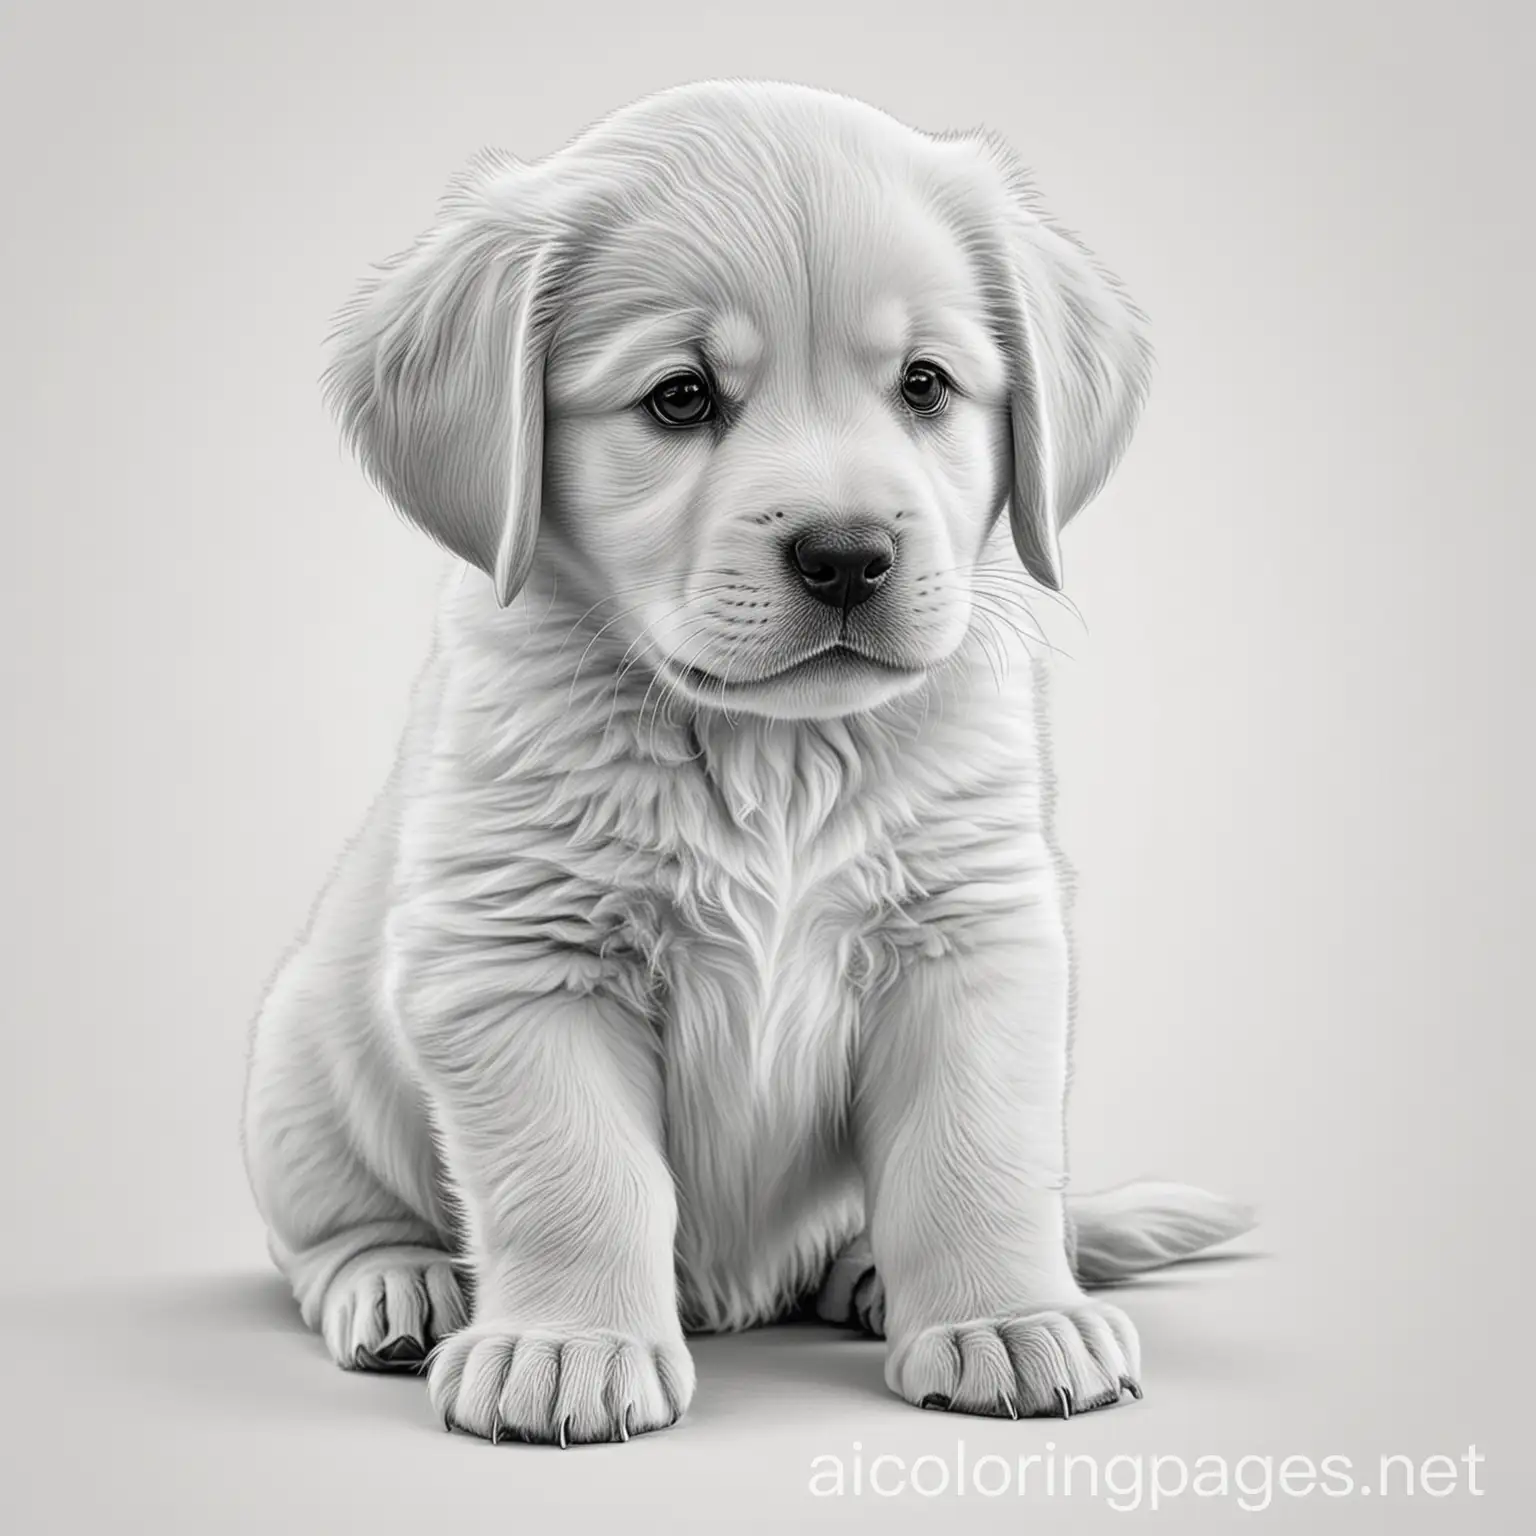 Adorable-Red-Golden-Retriever-Puppy-Coloring-Page-Simple-Line-Art-on-White-Background